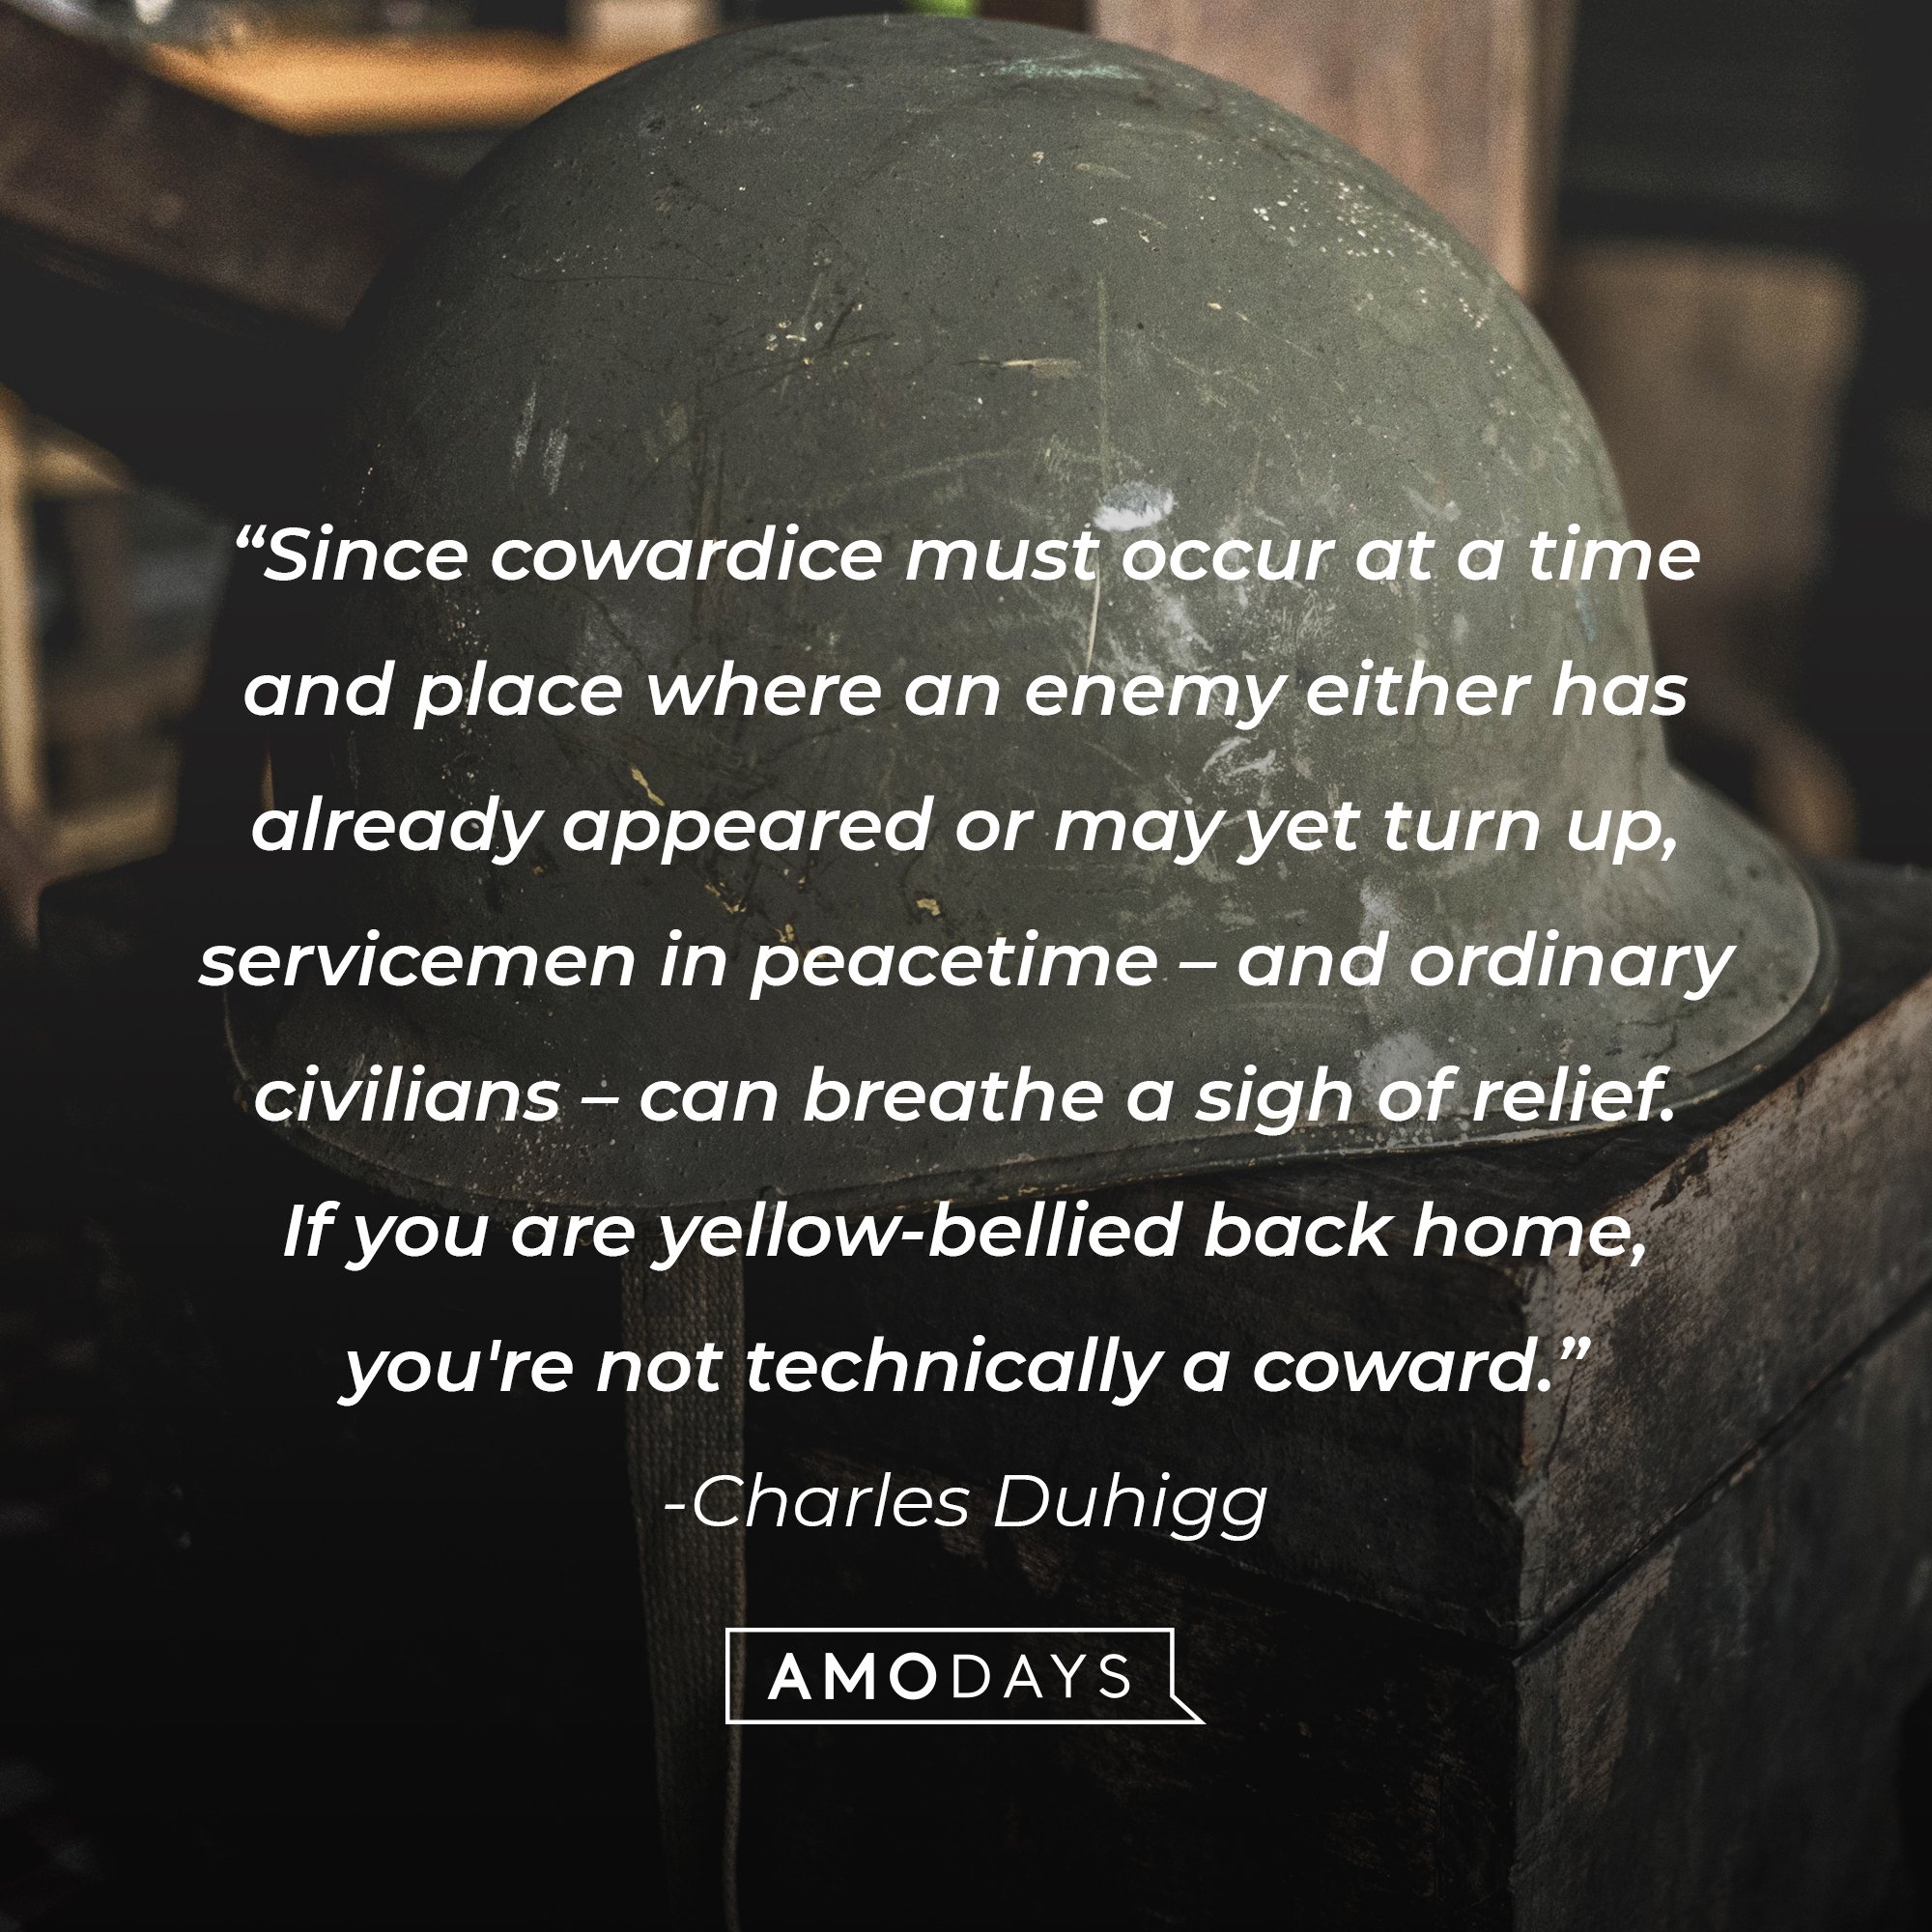 Charles Duhigg's quote: "Since cowardice must occur at a time and place where an enemy either has already appeared or may yet turn up, servicemen in peacetime – and ordinary civilians – can breathe a sigh of relief. If you are yellow-bellied back home, you're not technically a coward." | Image: AmoDays